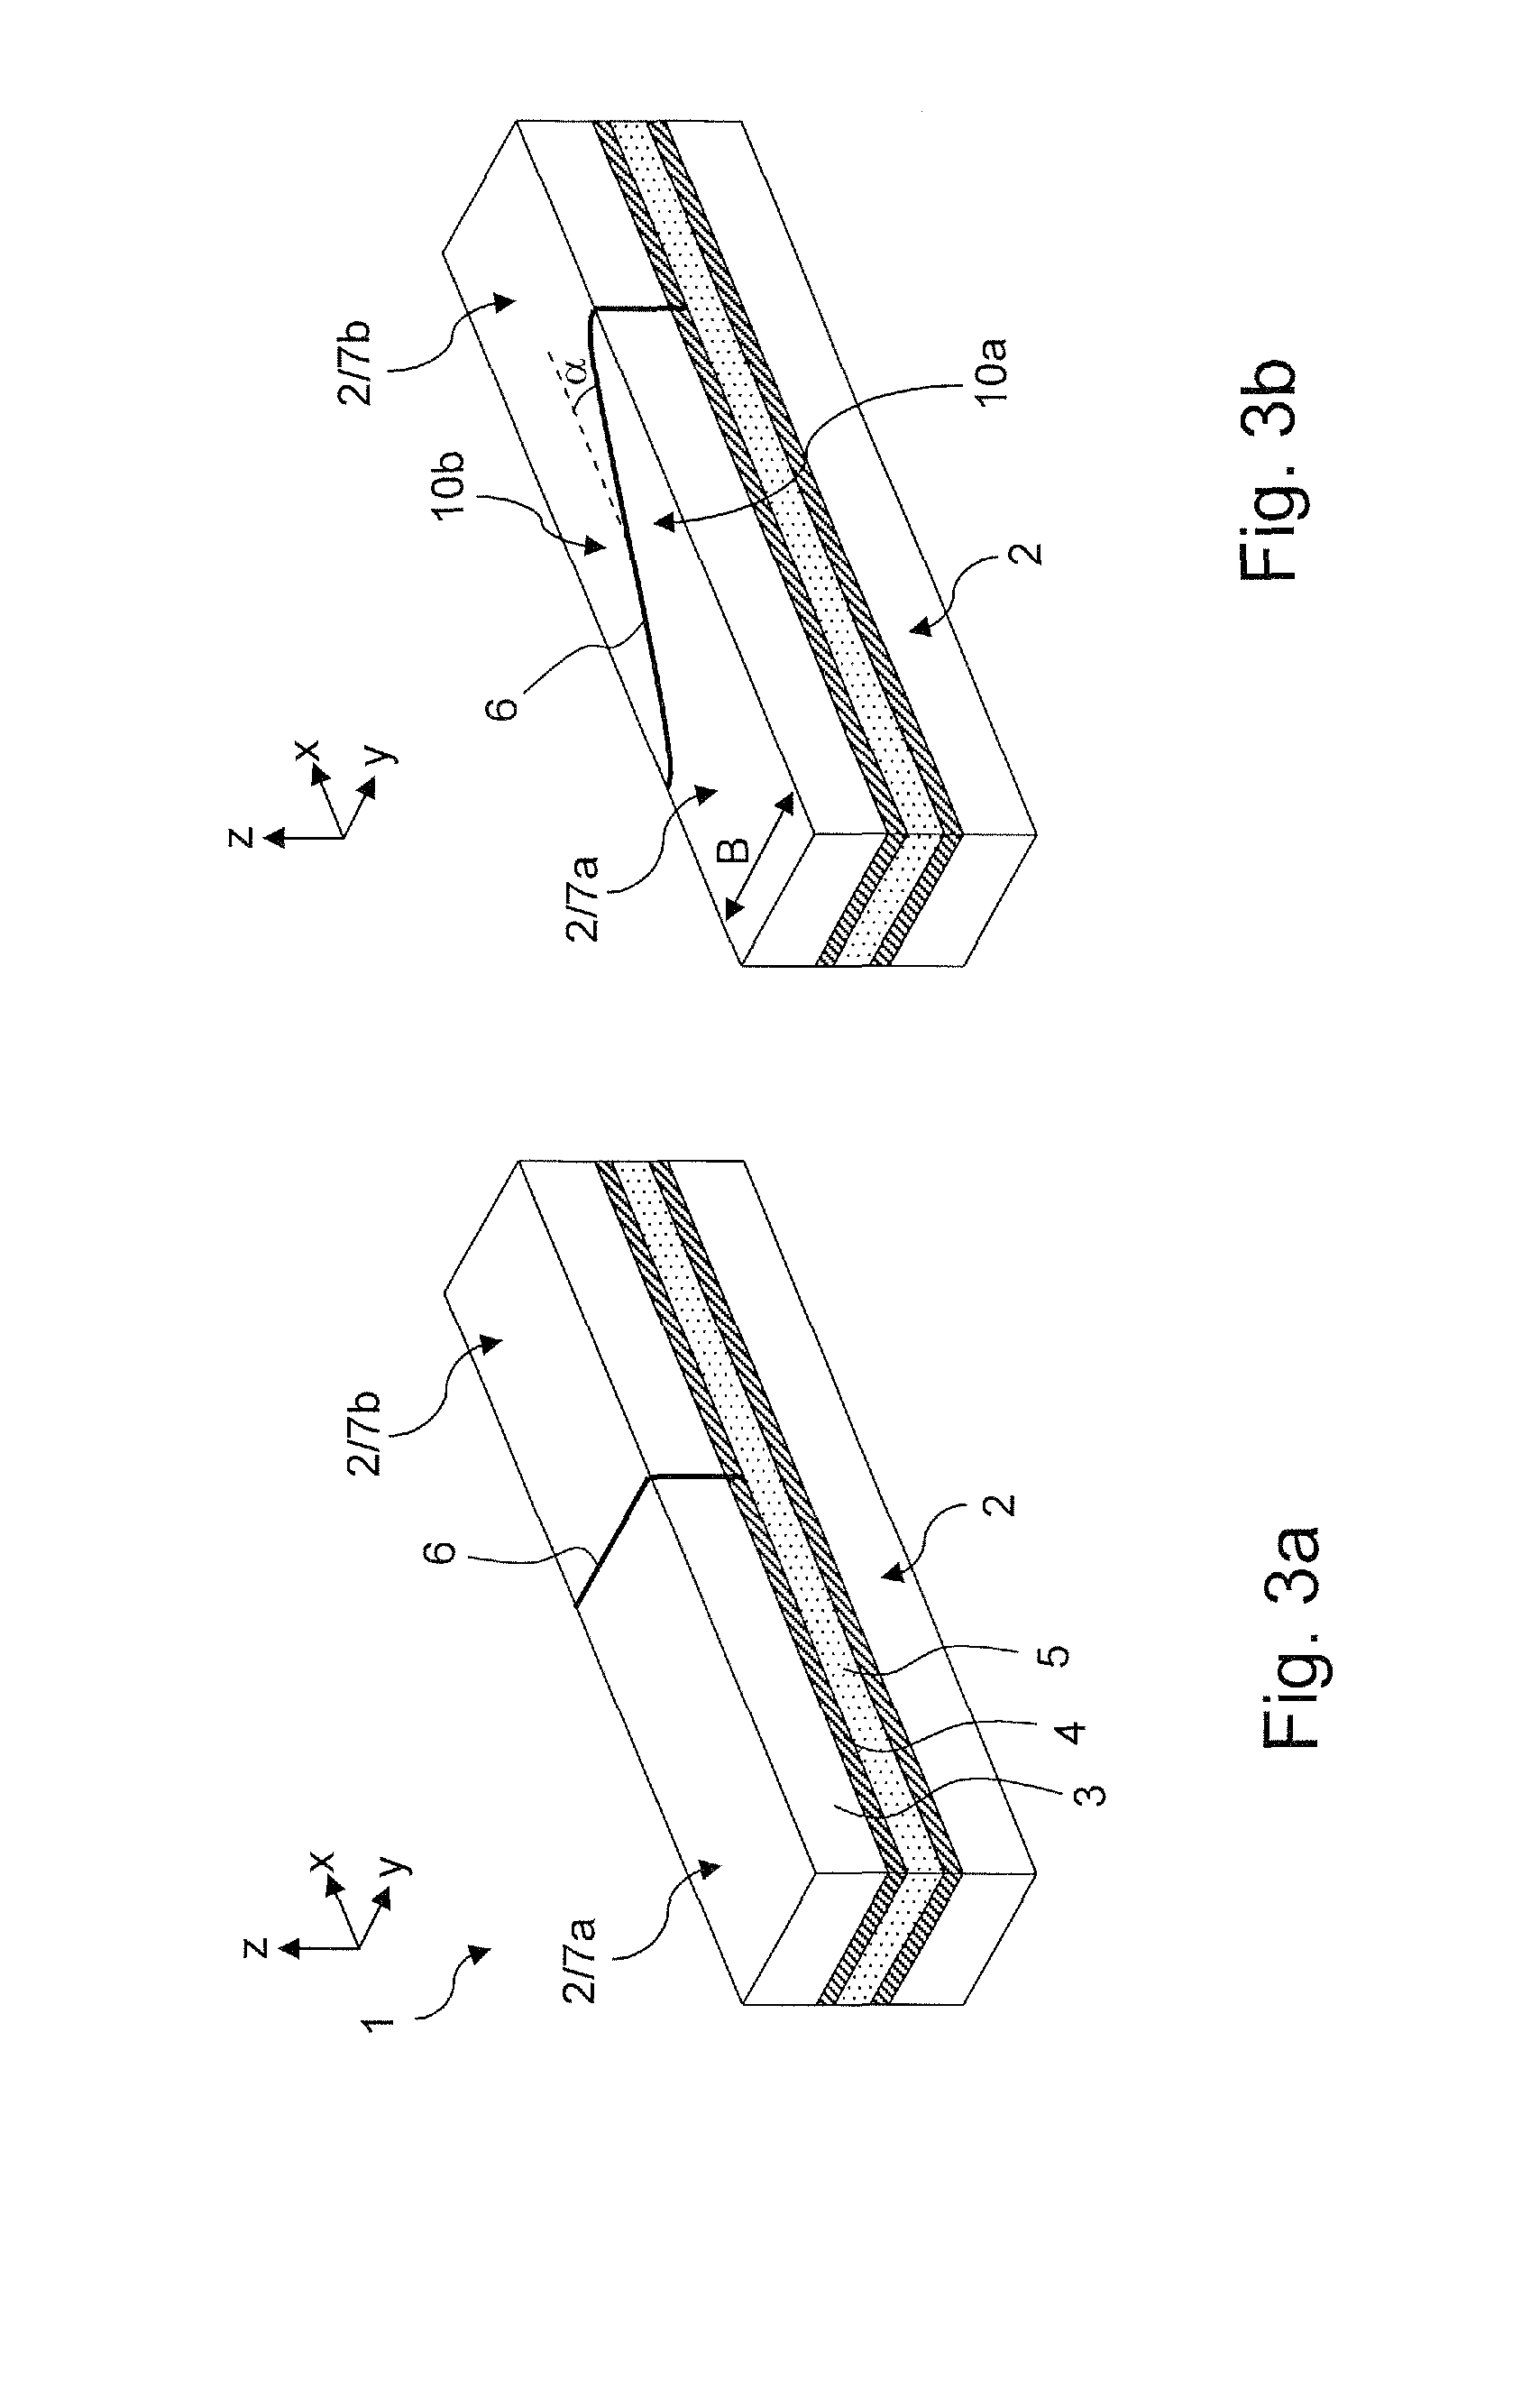 NMR Spectrometer comprising a superconducting magnetic coil having windings composed of a superconductor structure having strip pieces chained together